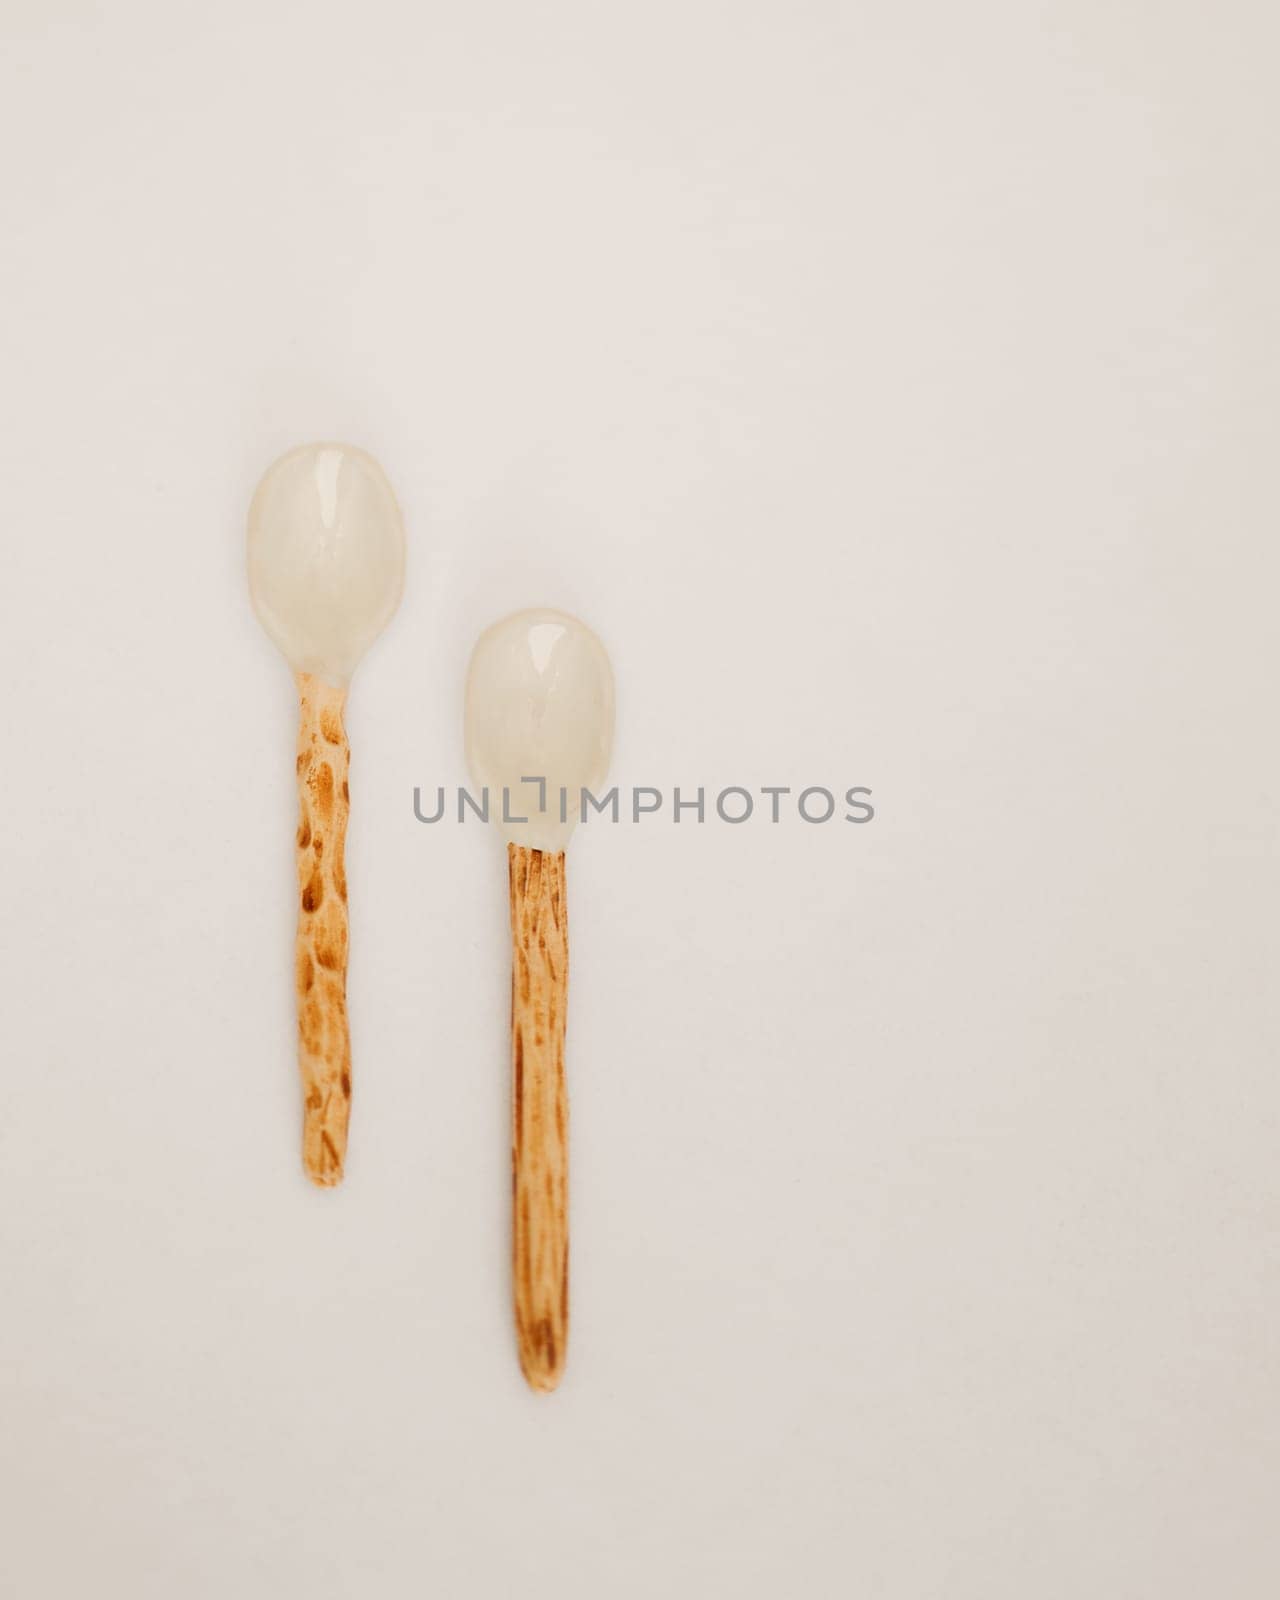 Two Unique Ceramic Spoons with Wooden Handles on a White Surface by apavlin